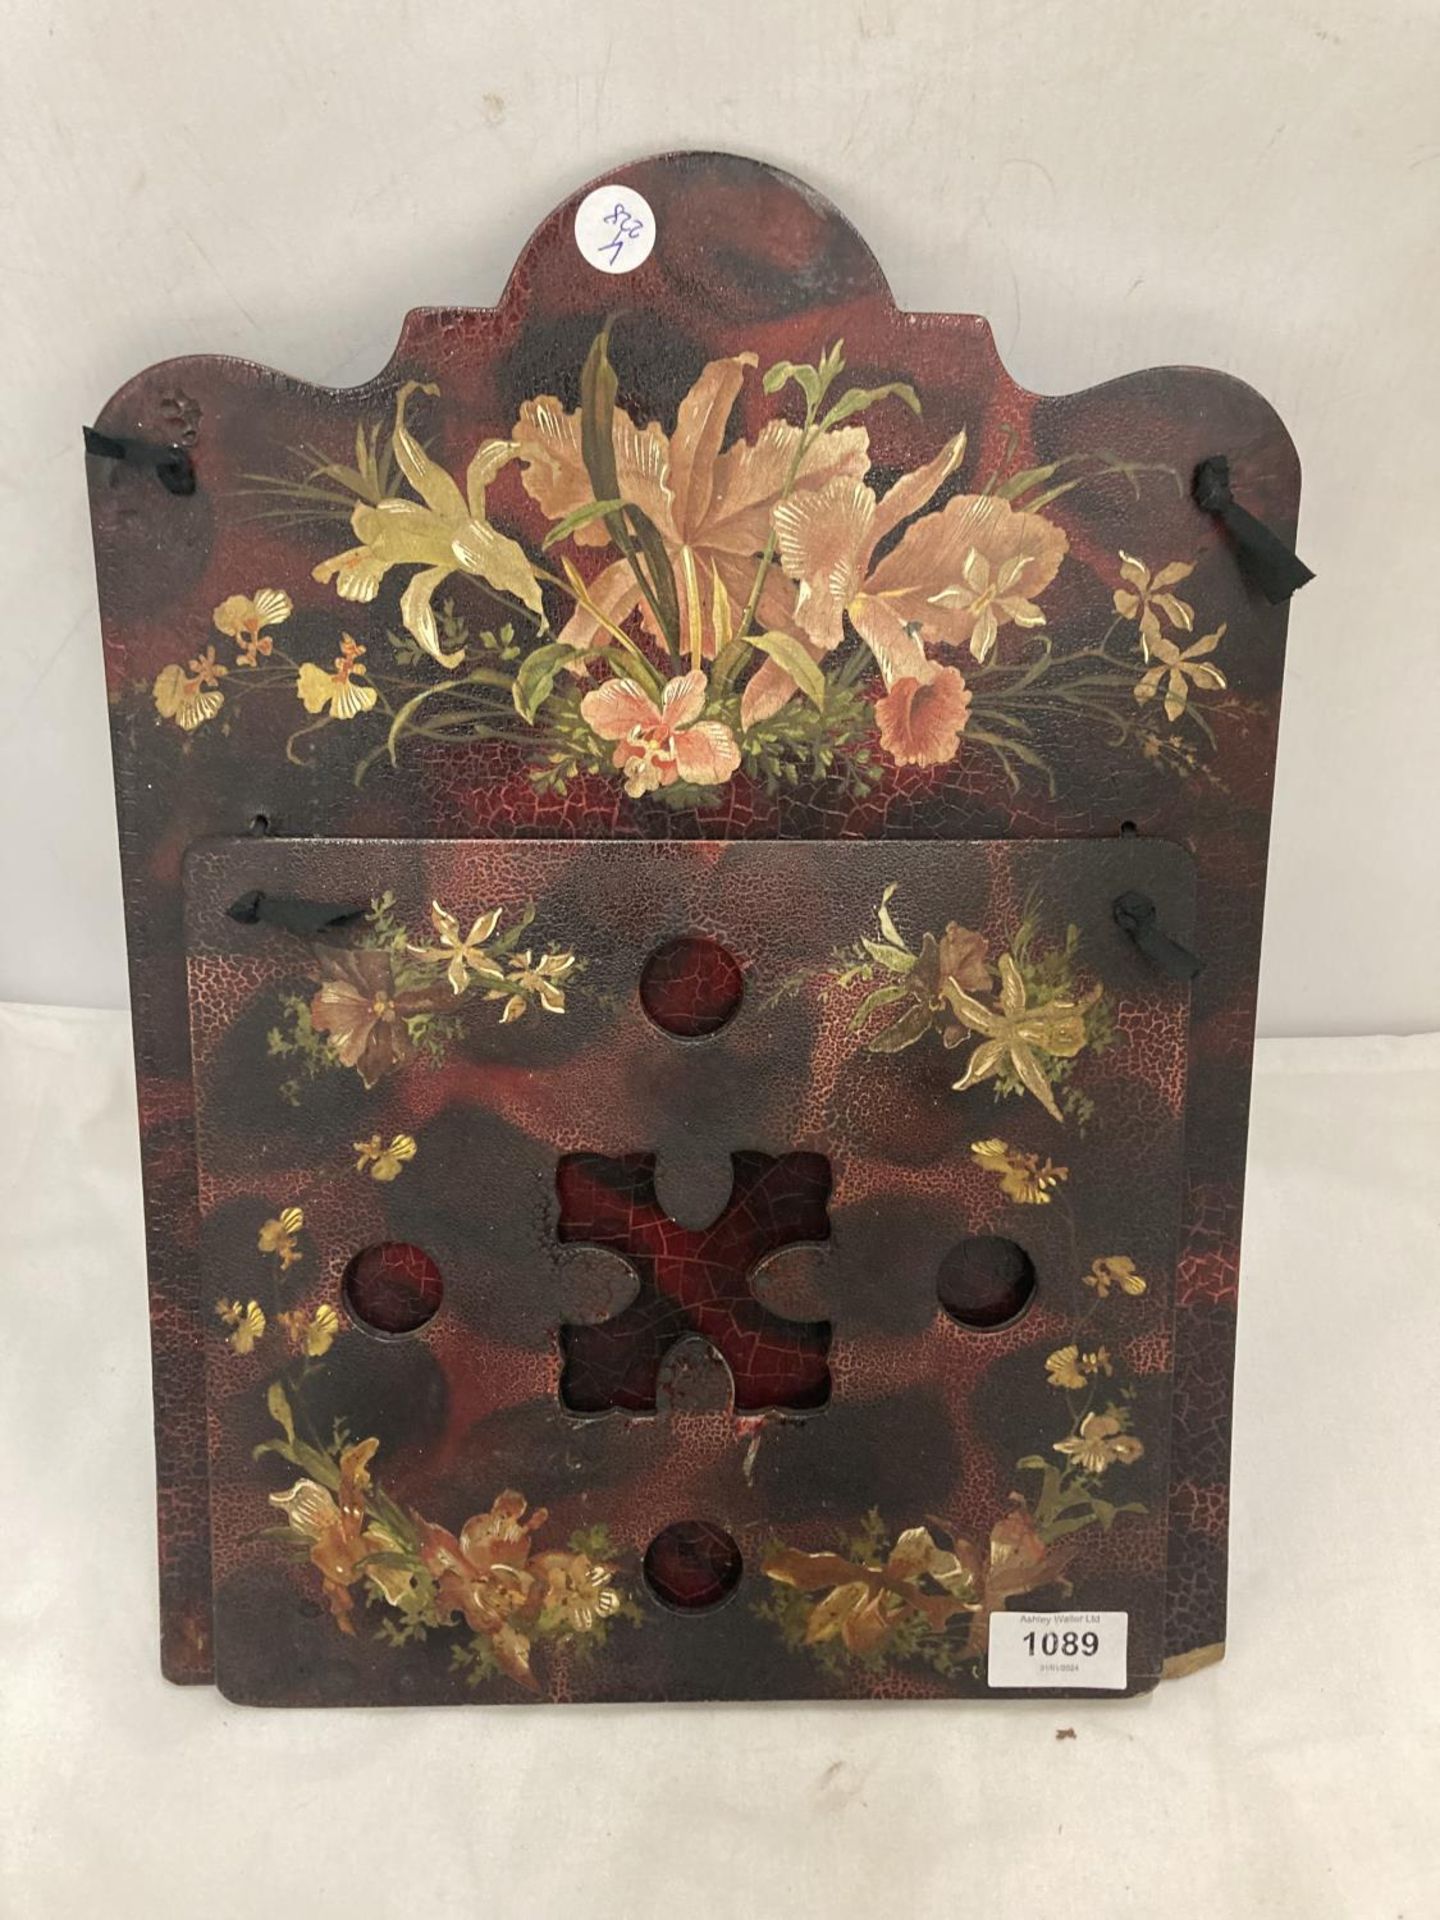 A VICTORIAN PAPIER MACHE WALL HANGING WITH HANDPAINTED FLORAL DESIGN